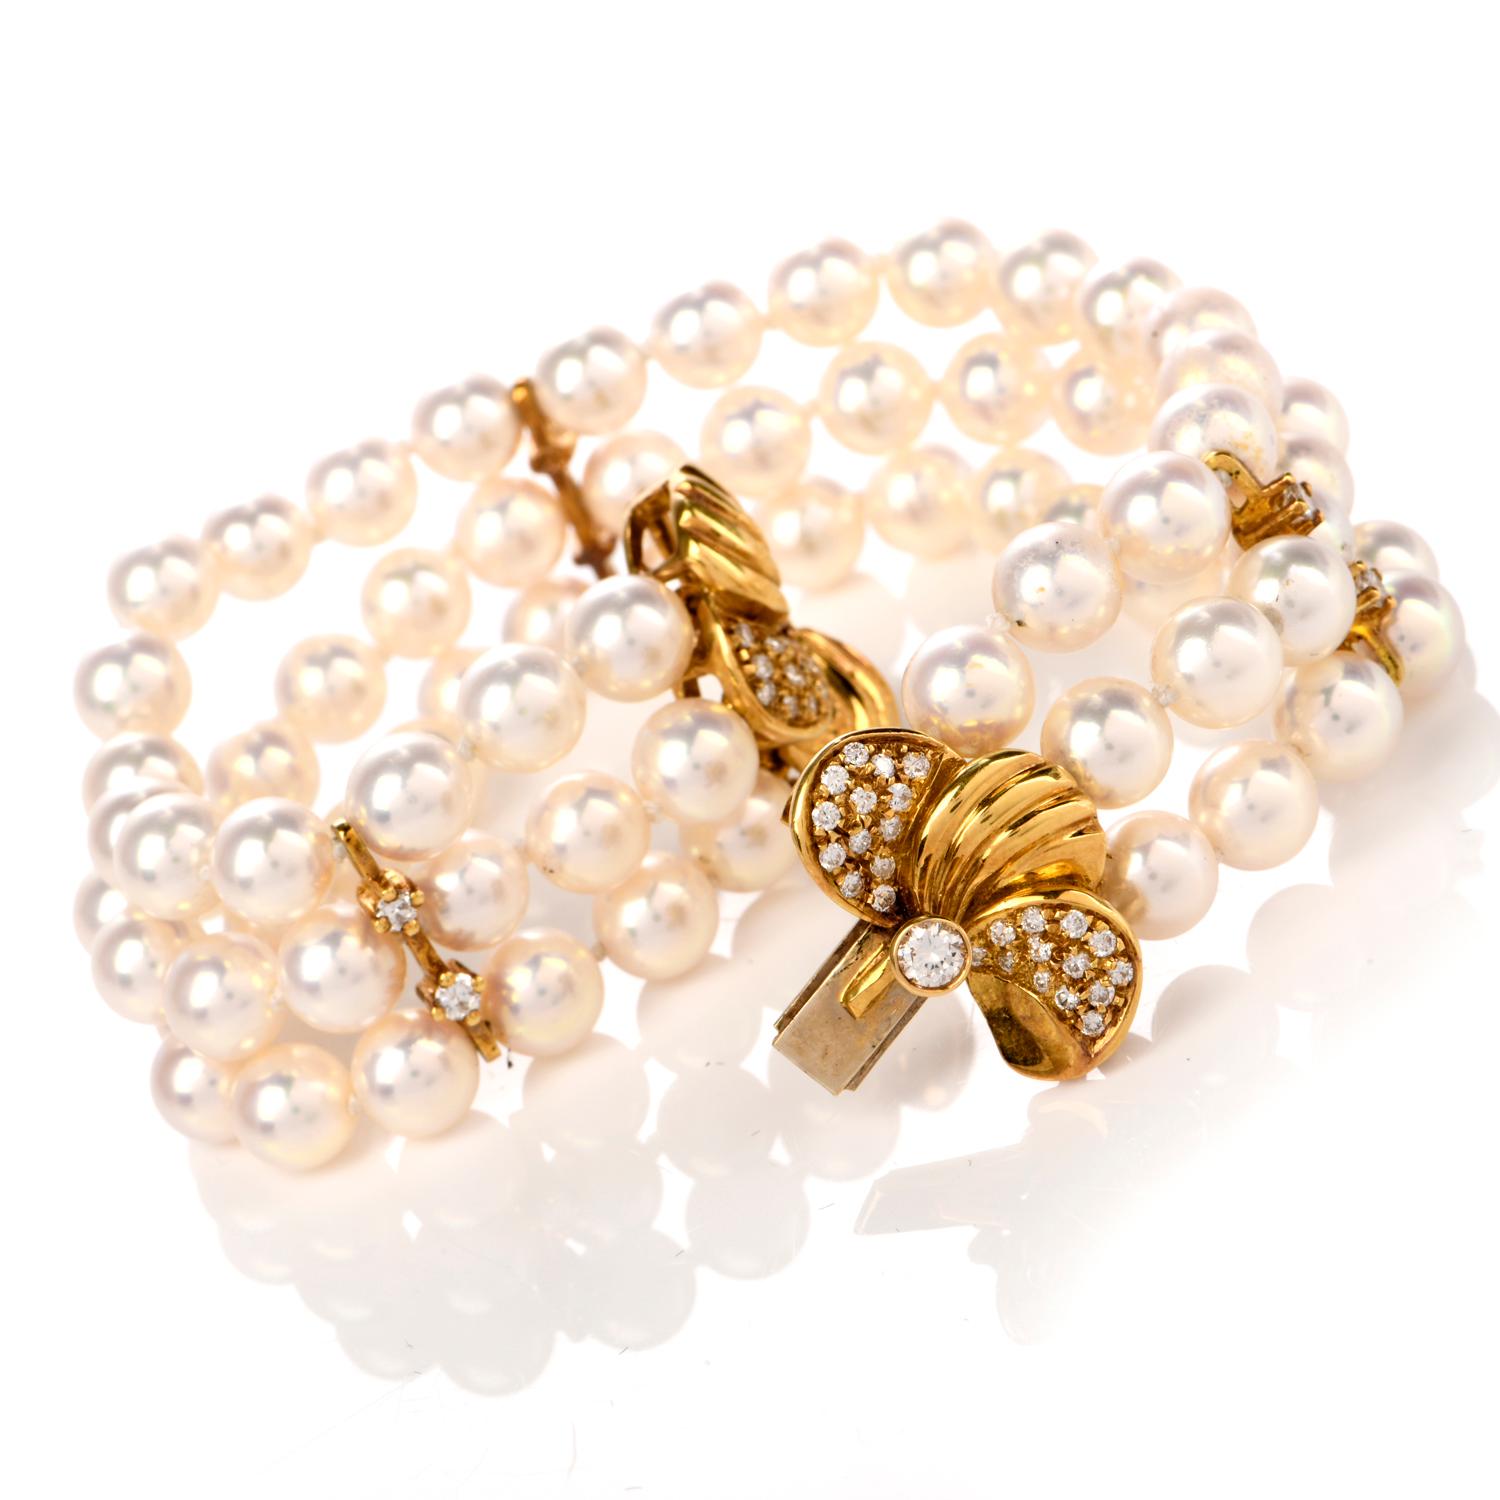 This elegant Mikimoto pearl and diamond floral bracelet is crafted with 18-karat yellow gold, weighing 35.2 grams and measuring 6.25 inches around the wrist x 20mm wide. Displaying a centered flower motif clasp, pave-set with round cut diamonds